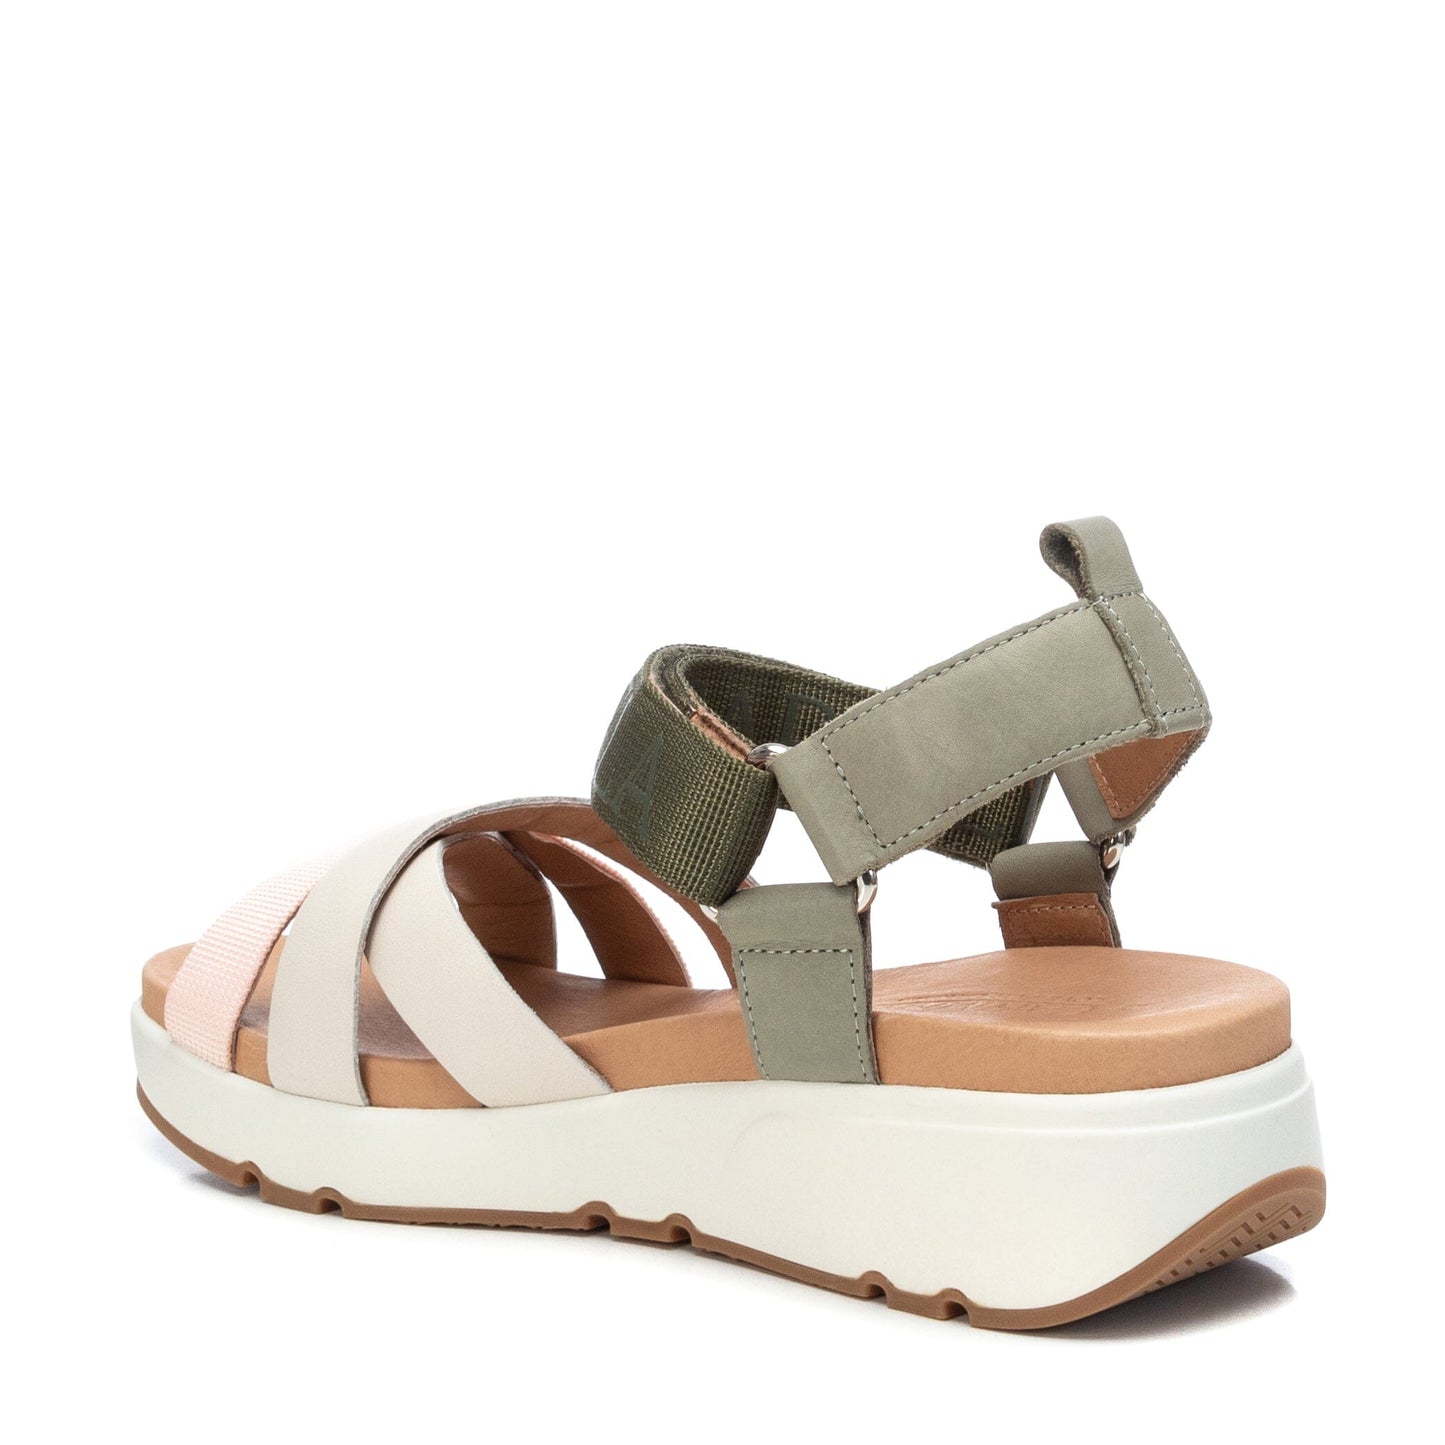 68468 Spanish leather sandals in sport deluxe style in Khaki, white sandals Sam Star Shoes 